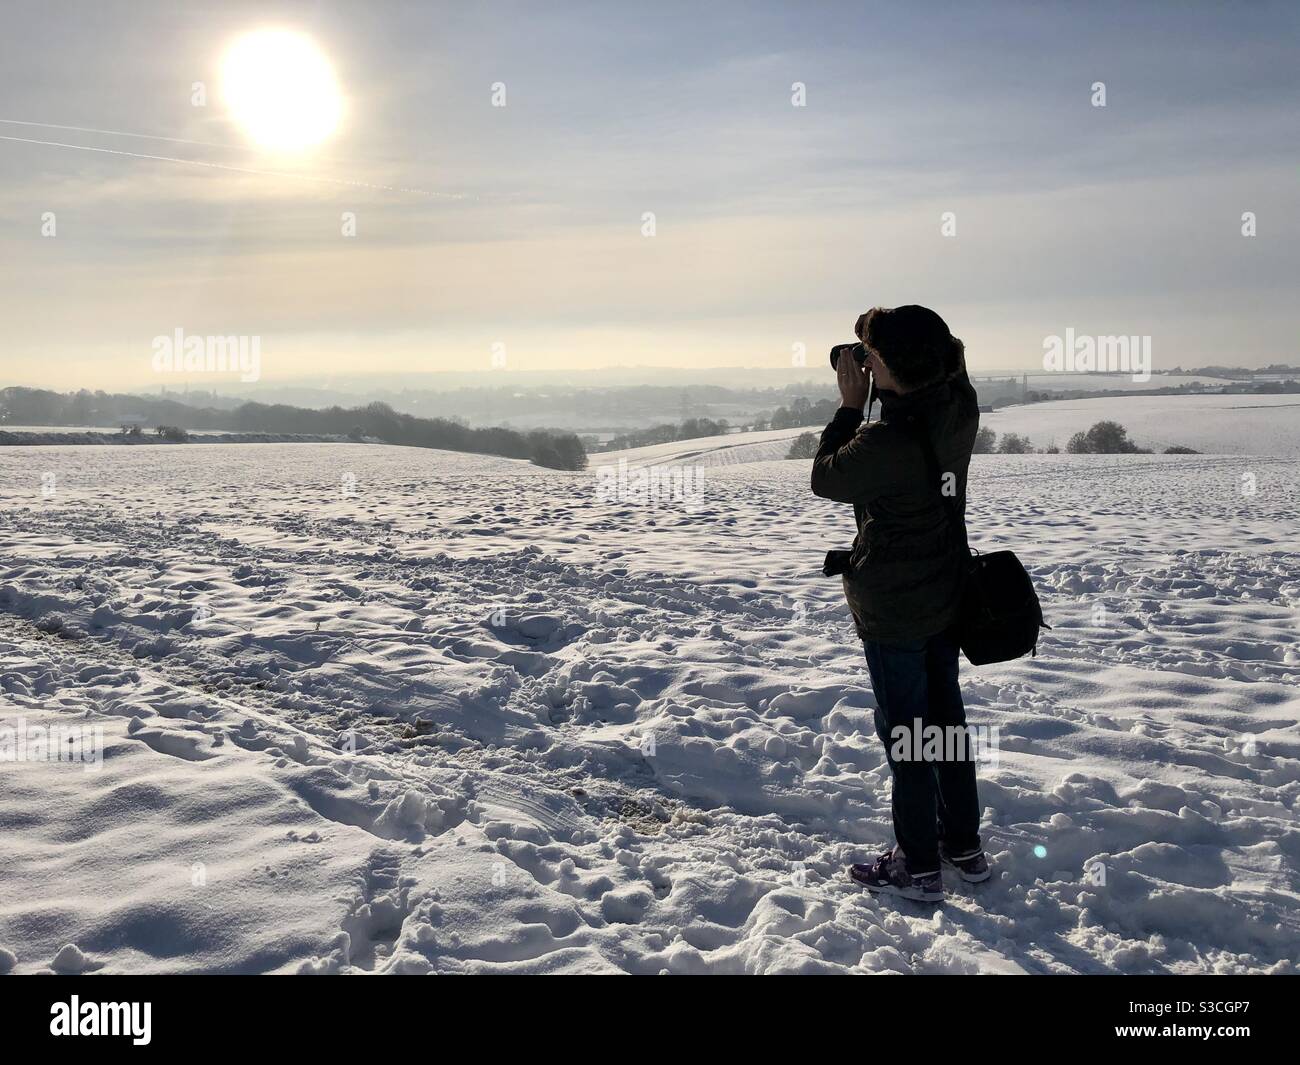 UK weather:Sunny afternoon in Morley, Leeds, West Yorkshire. 15th January 2021 Yesterday’s snow looked spectacular this photographer was enjoying taking photos. Credit:Victoria Gardner/Alamy Live News Stock Photo